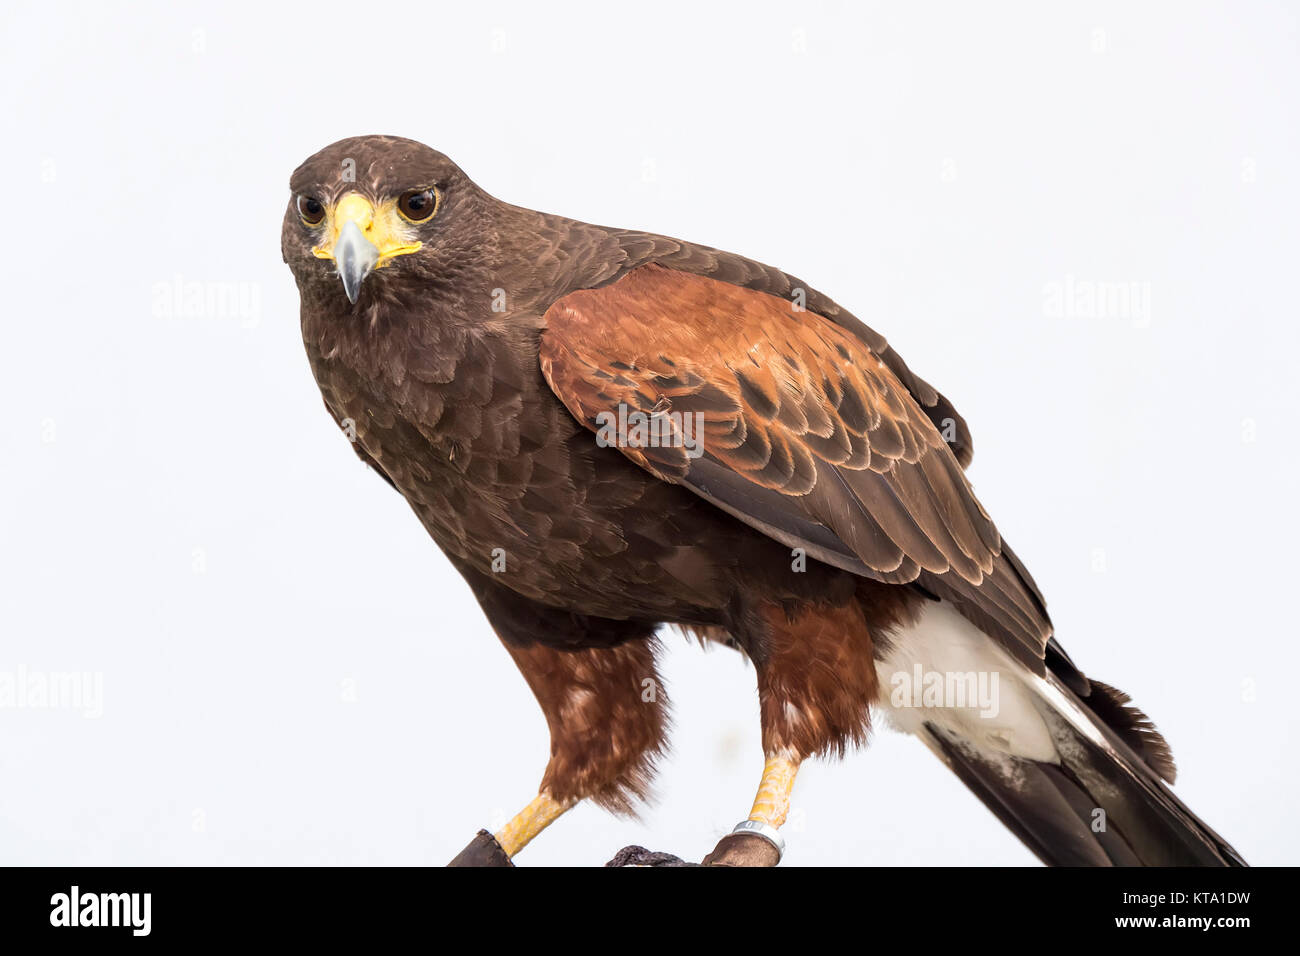 Eagle closely watching intently Stock Photo